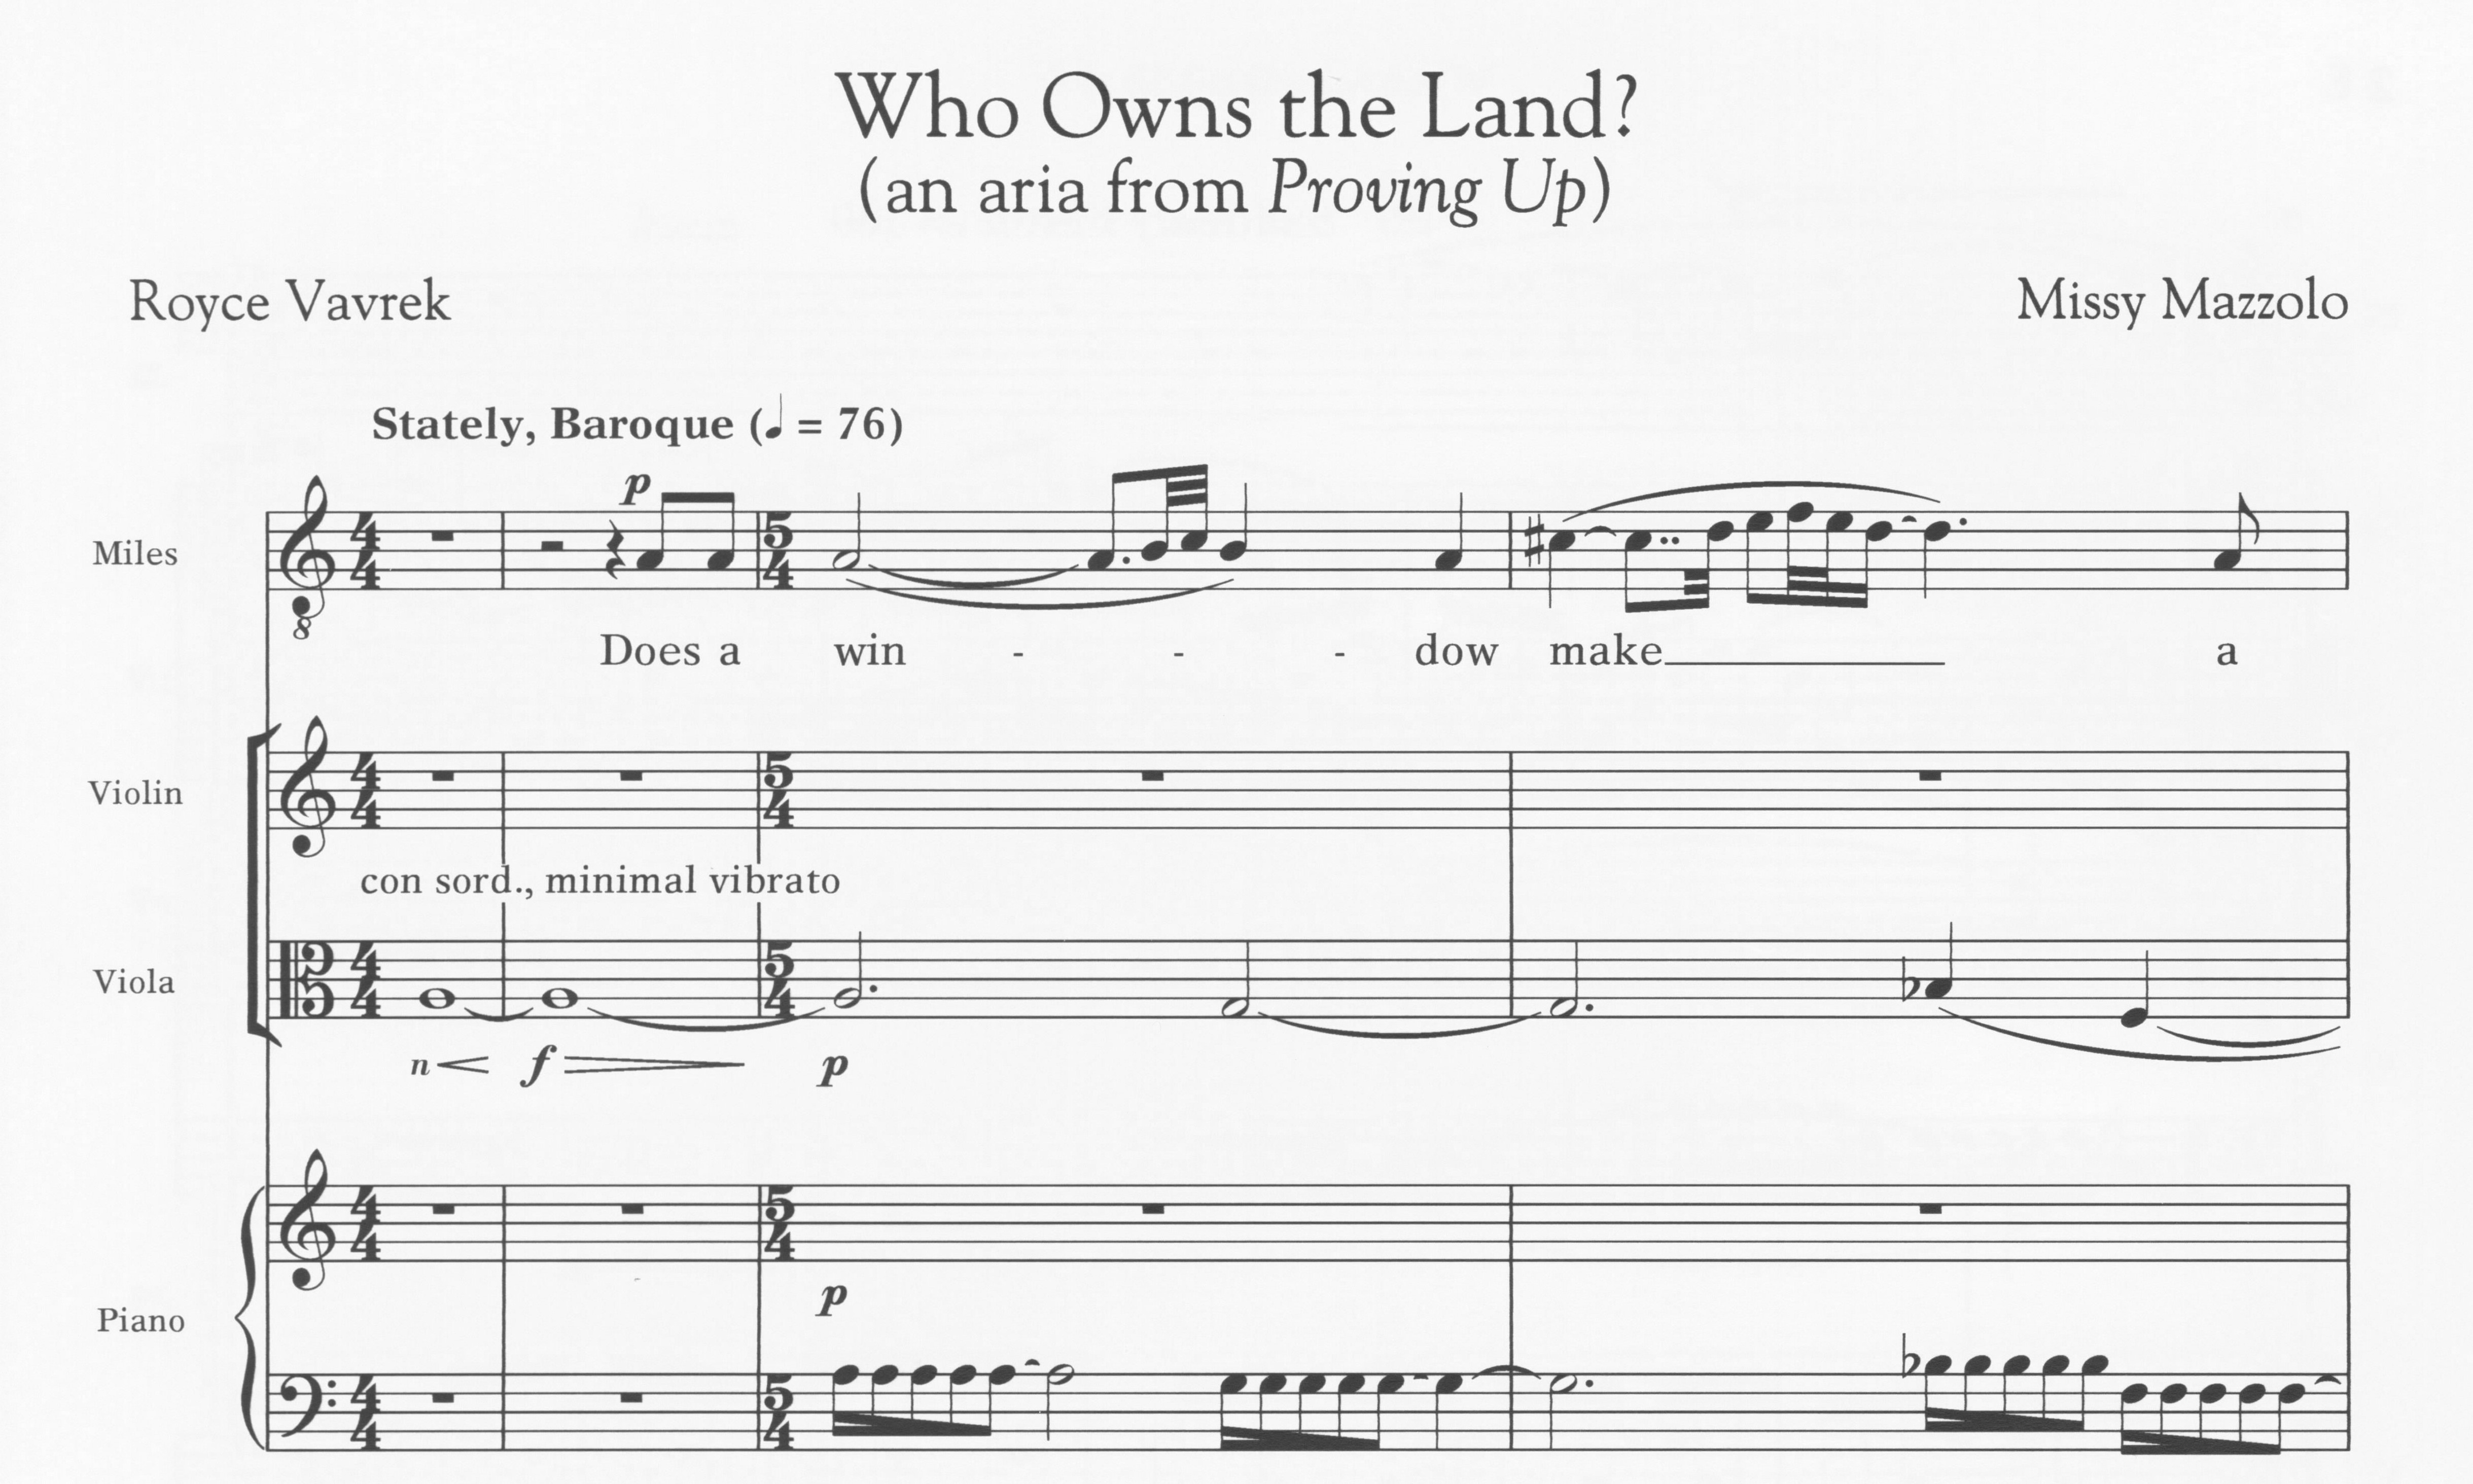 Who owns the land? - Missy Mazzoli